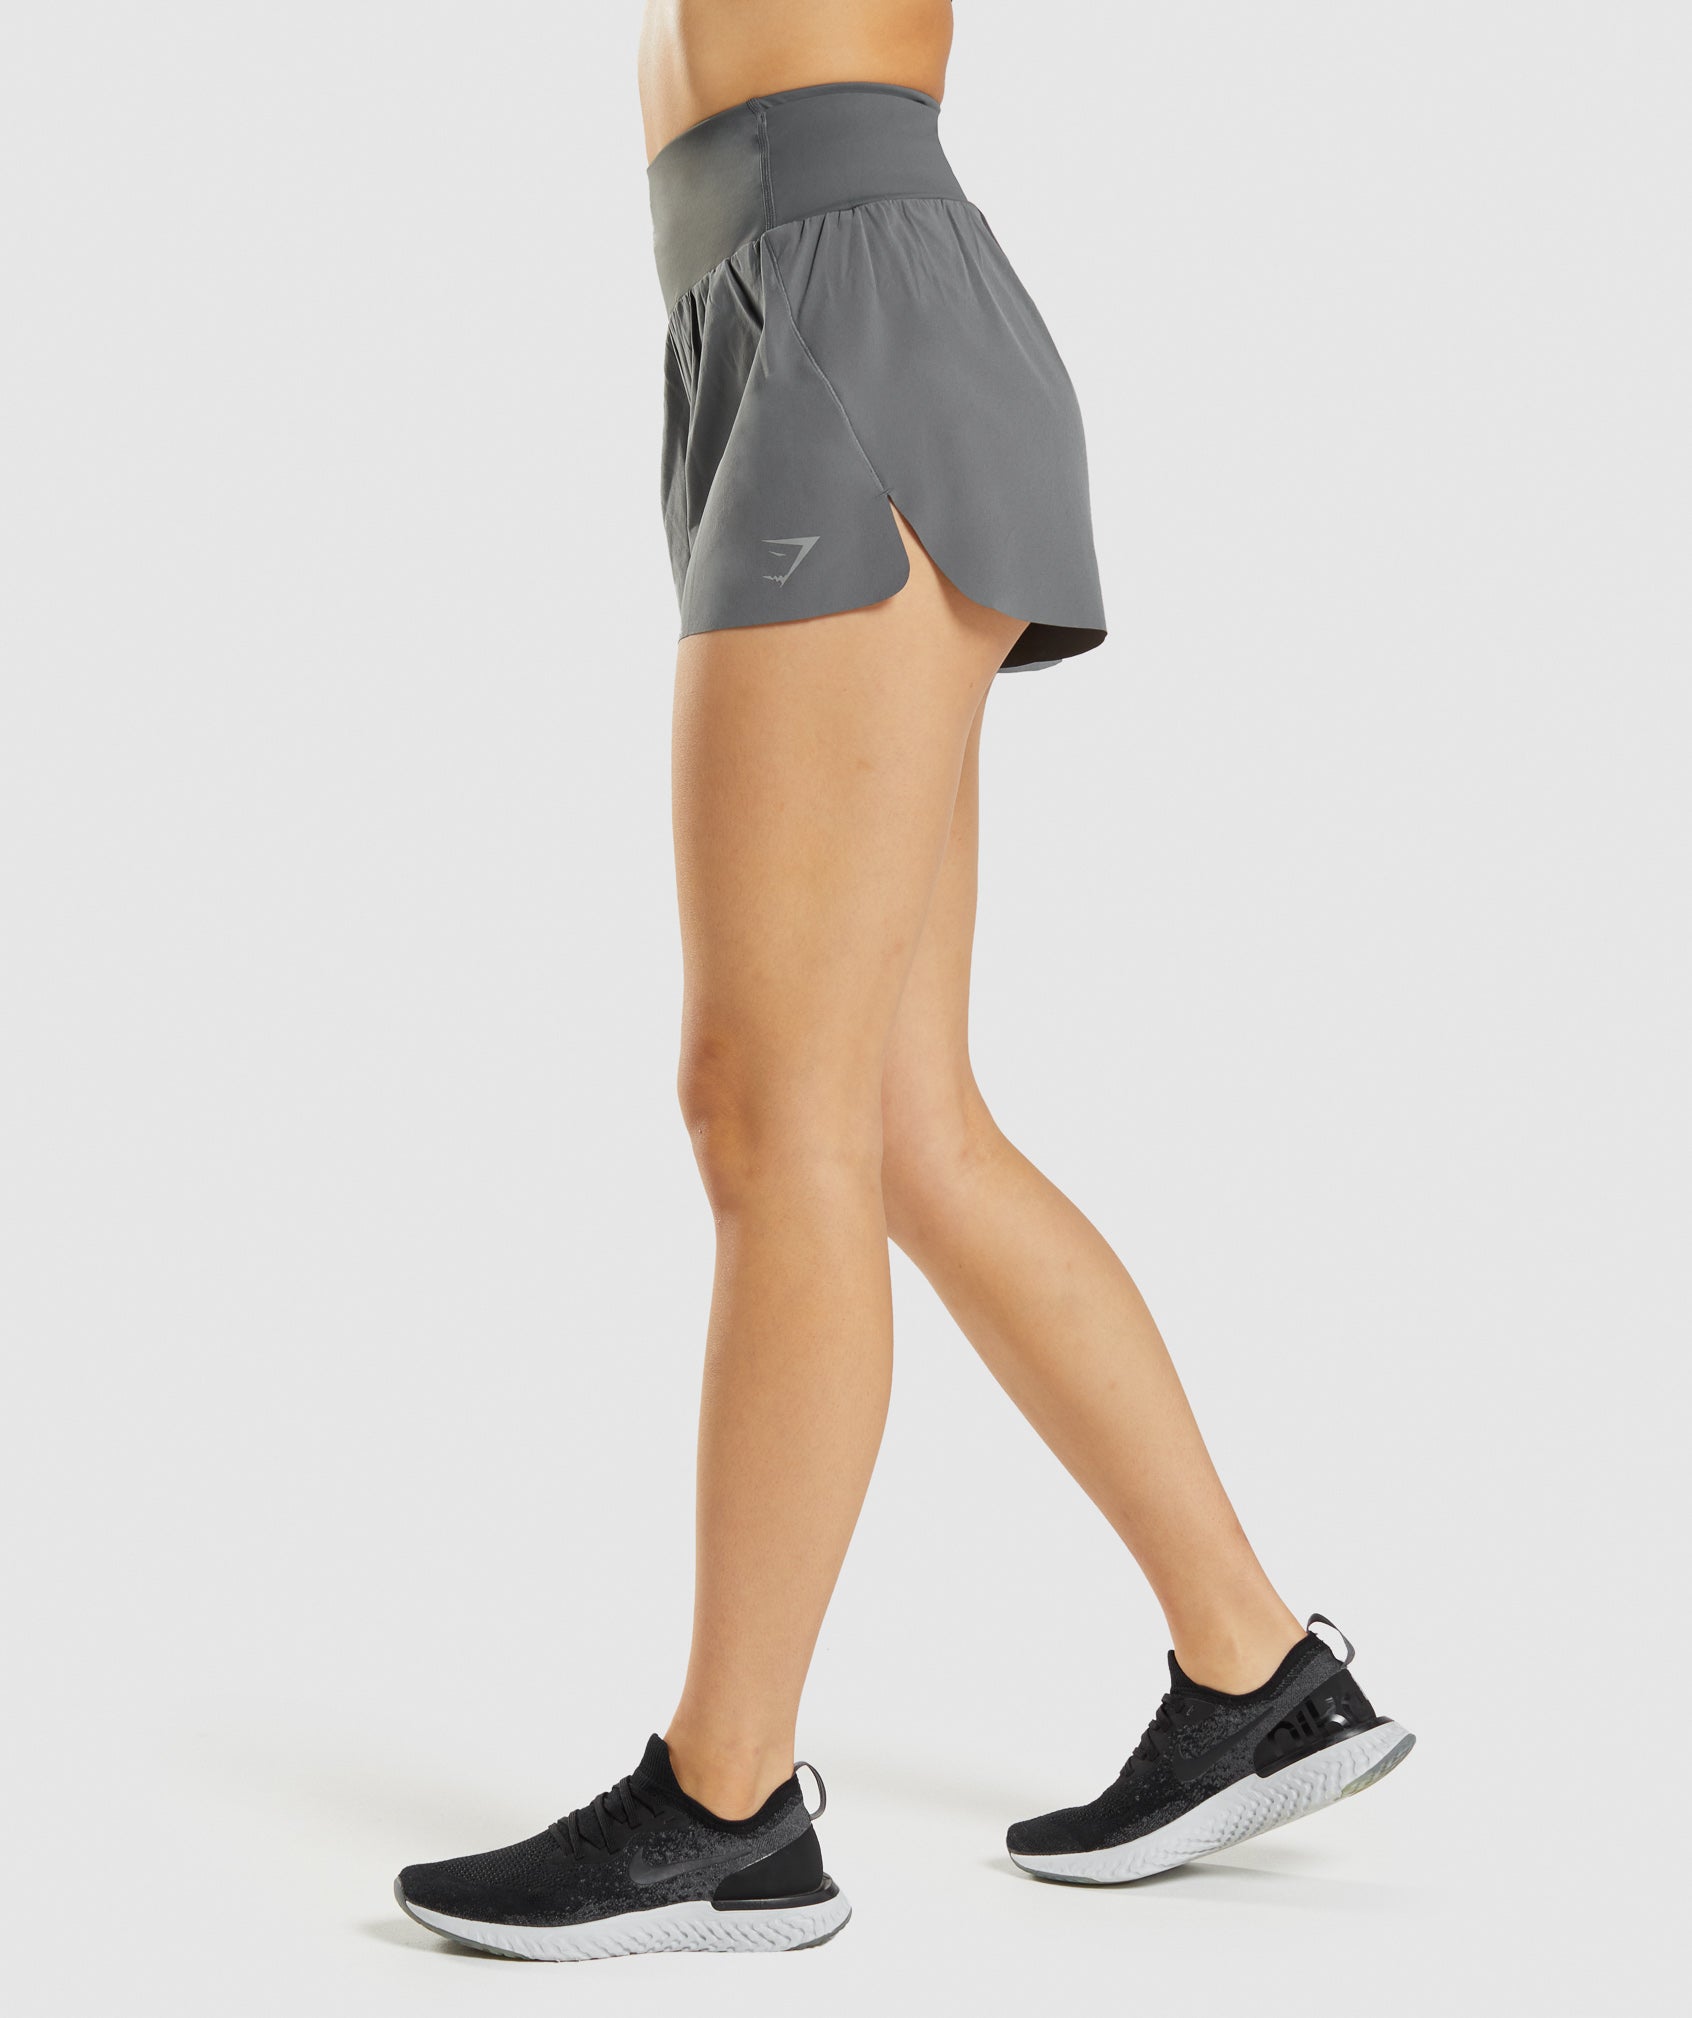 Speed Shorts in Grey - view 4